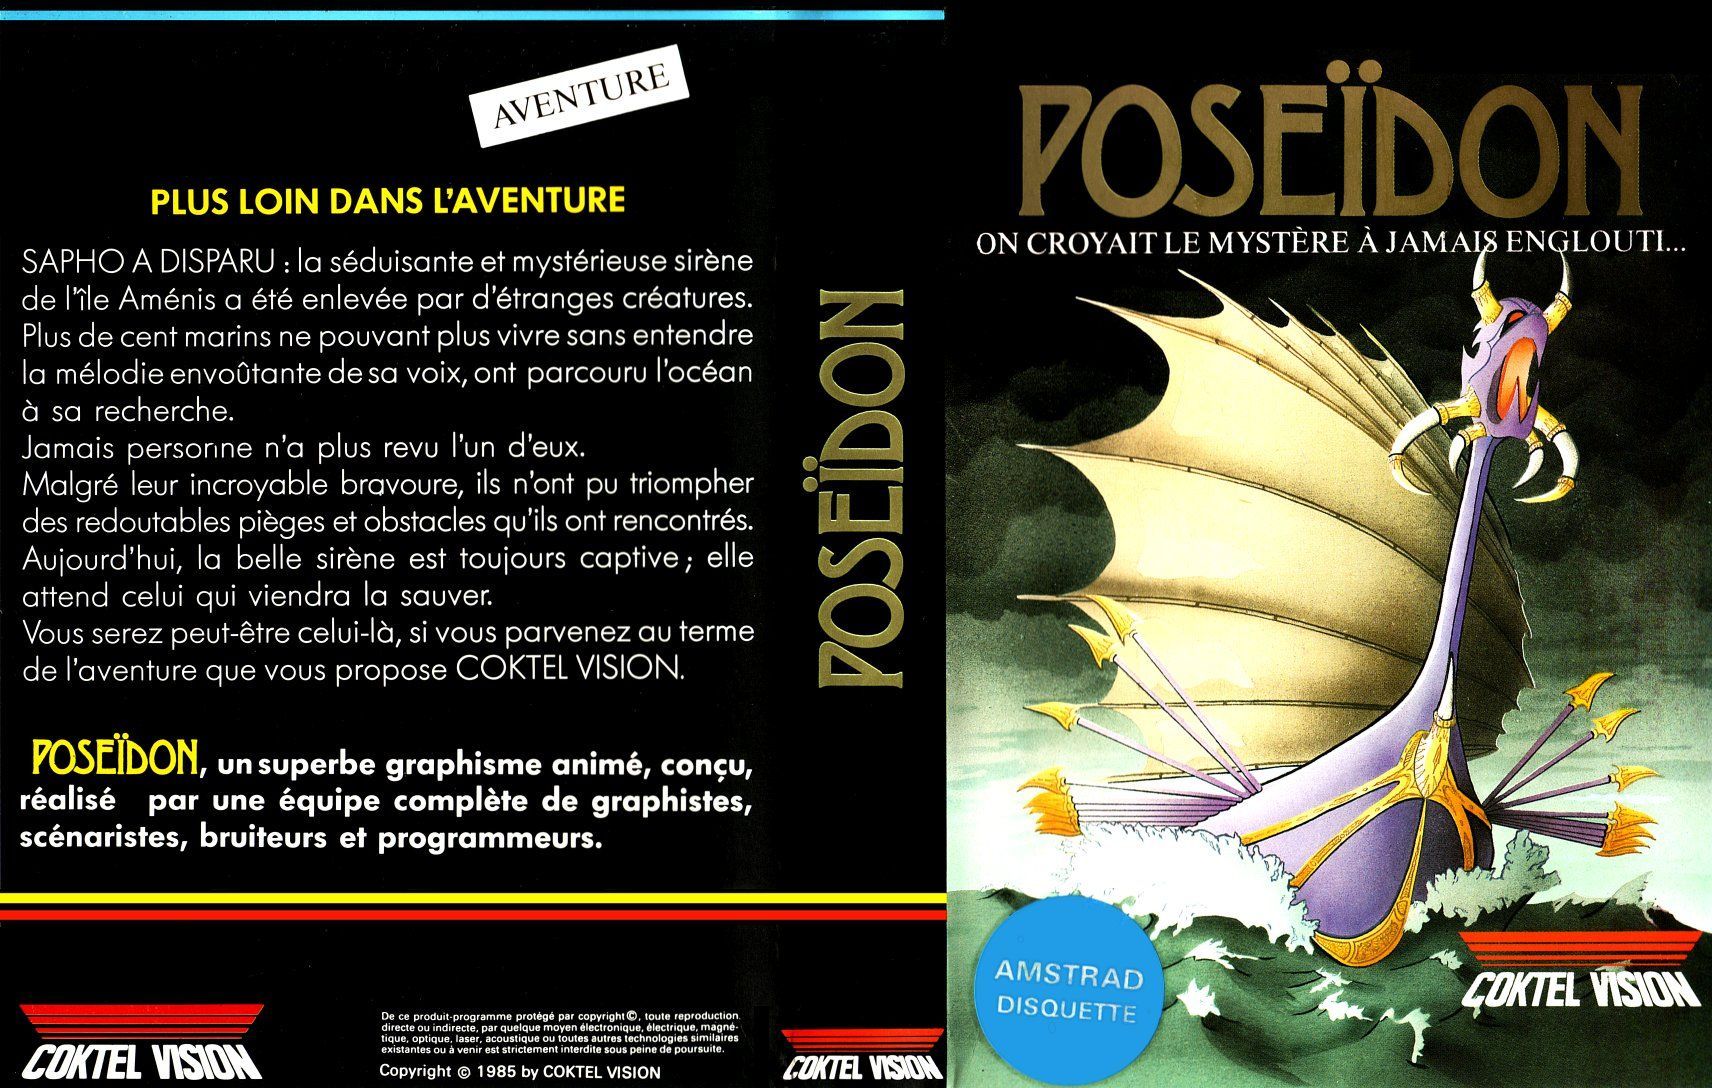 cover of the Amstrad CPC game poseidon by Mig